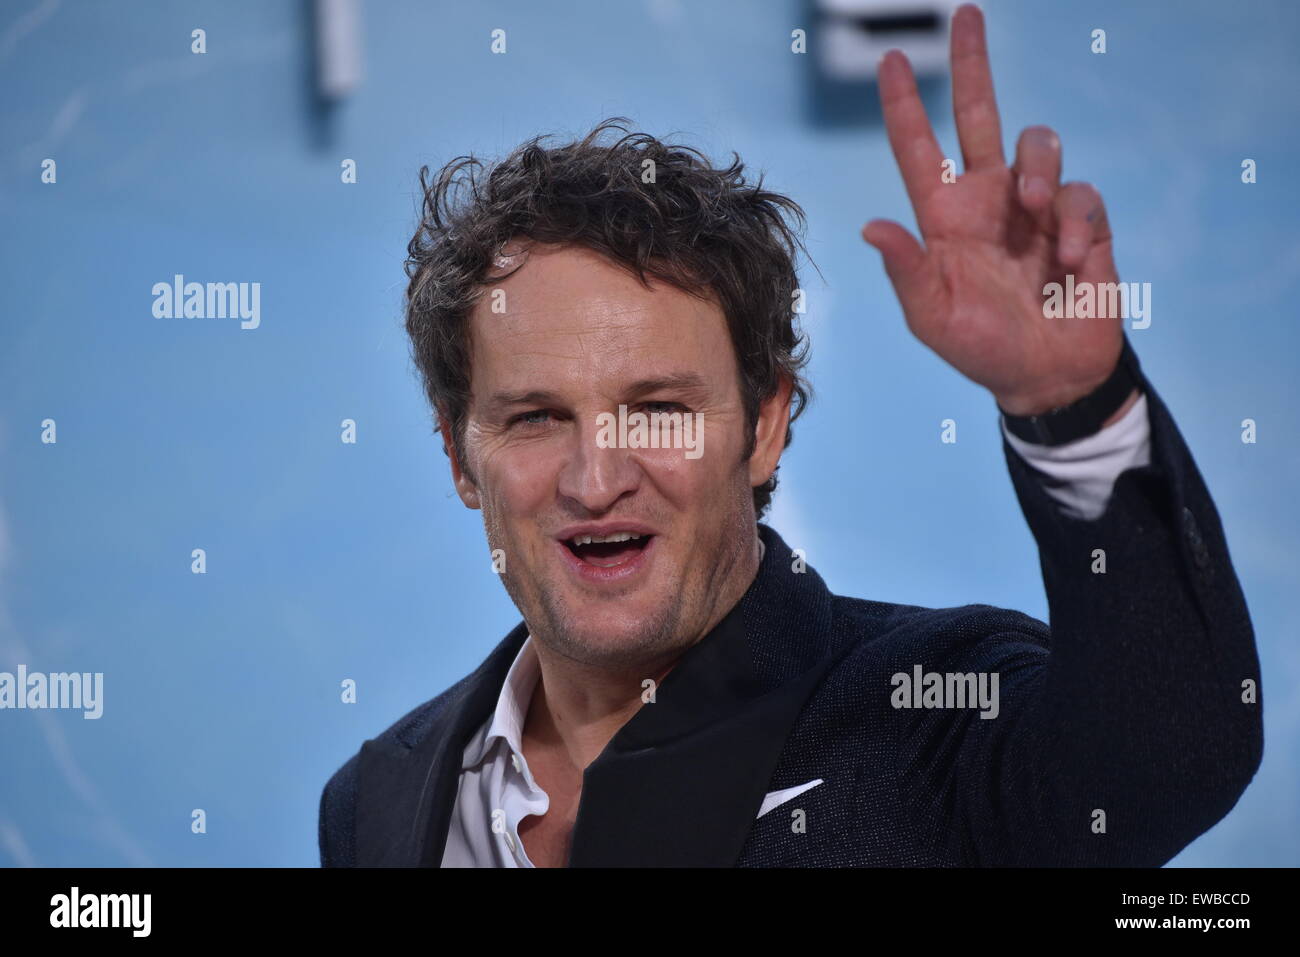 Berlin, Germany. 21st June, 2015. Australian actor Jason Clarke attends the Premiere of the movie 'Terminator Genisys' at CineStar Theater at the Sony Center in Berlin, Germany. Credit:  dpa picture alliance/Alamy Live News Stock Photo